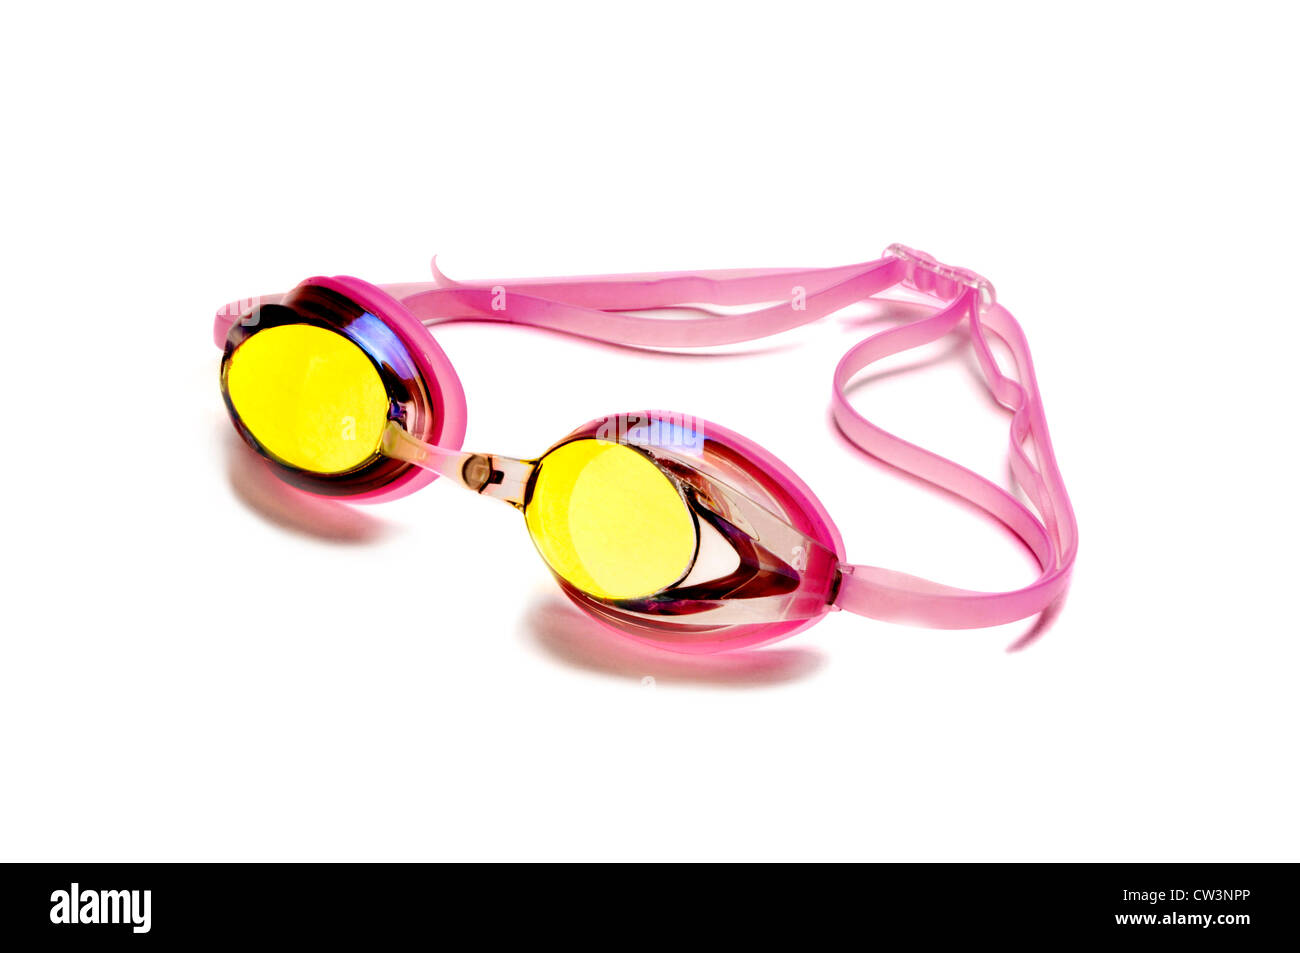 pink swim goggles with yellow lenses on white backgroiund Stock Photo